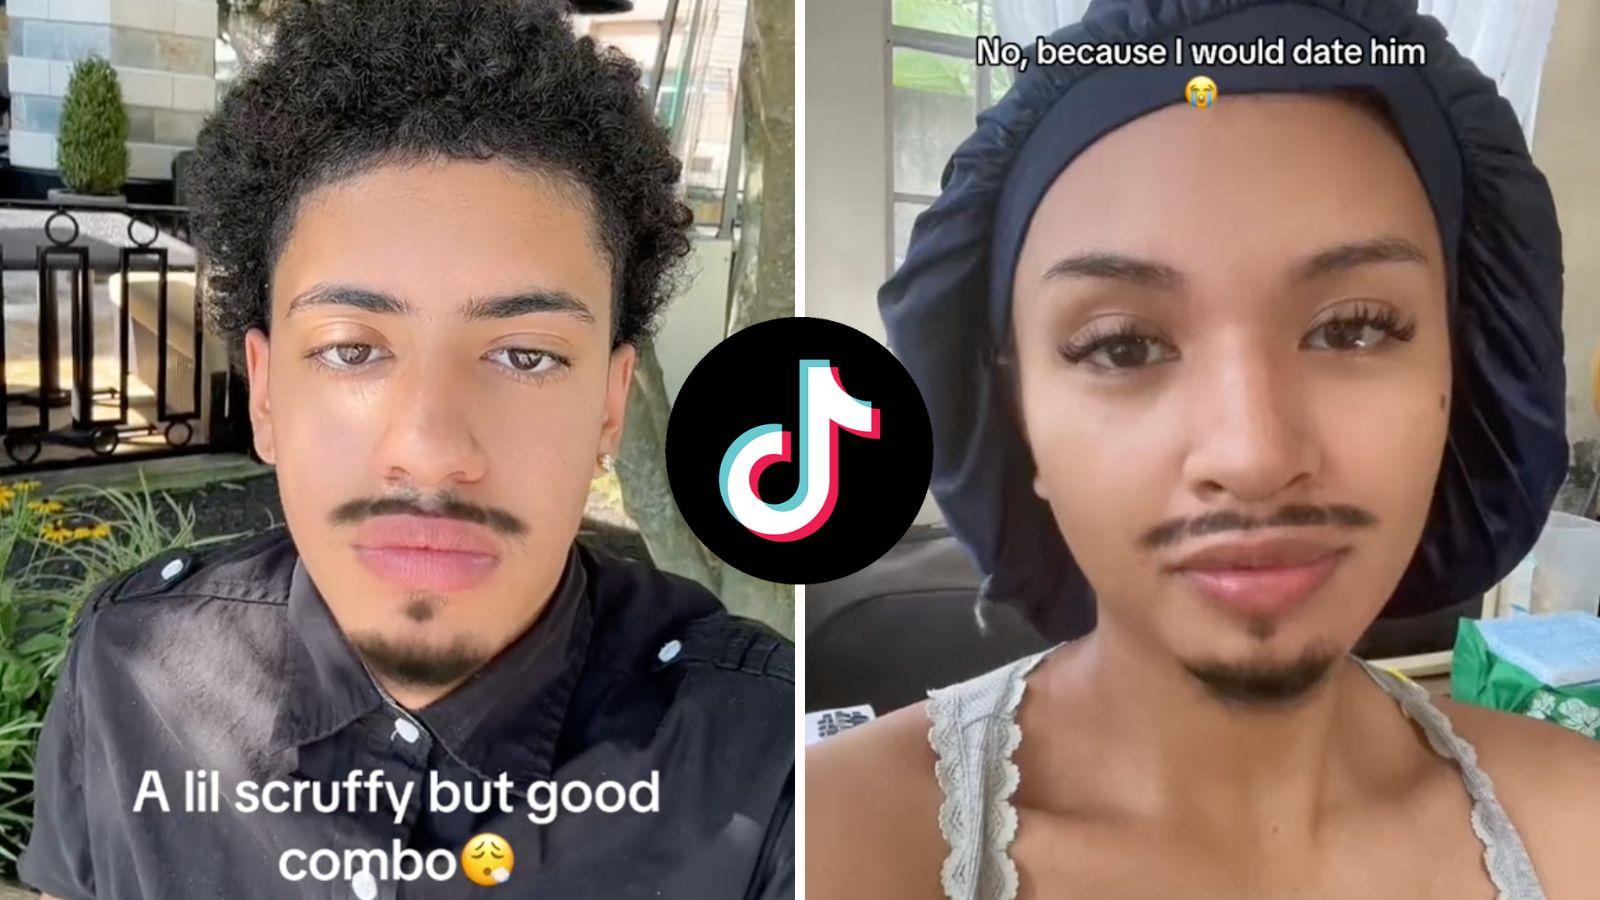 TikTok users trying out the beard filter.